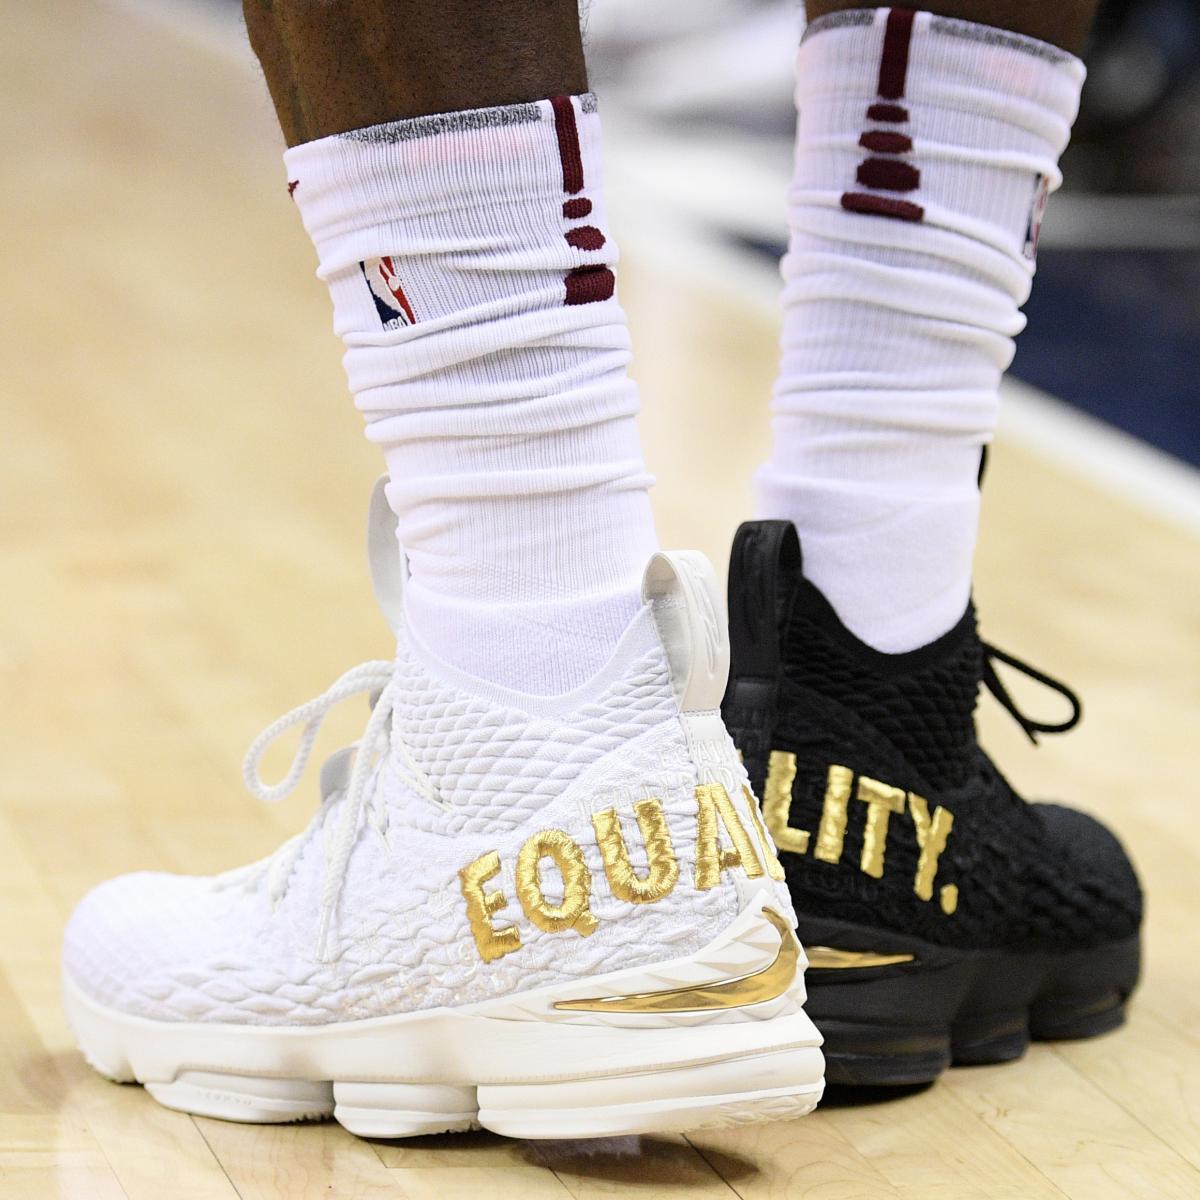 LeBron James Wearing 'Equality' Shoes: 'Not Going to 1 Person Dictate Us' | News, Scores, Highlights, Stats, and Rumors | Bleacher Report